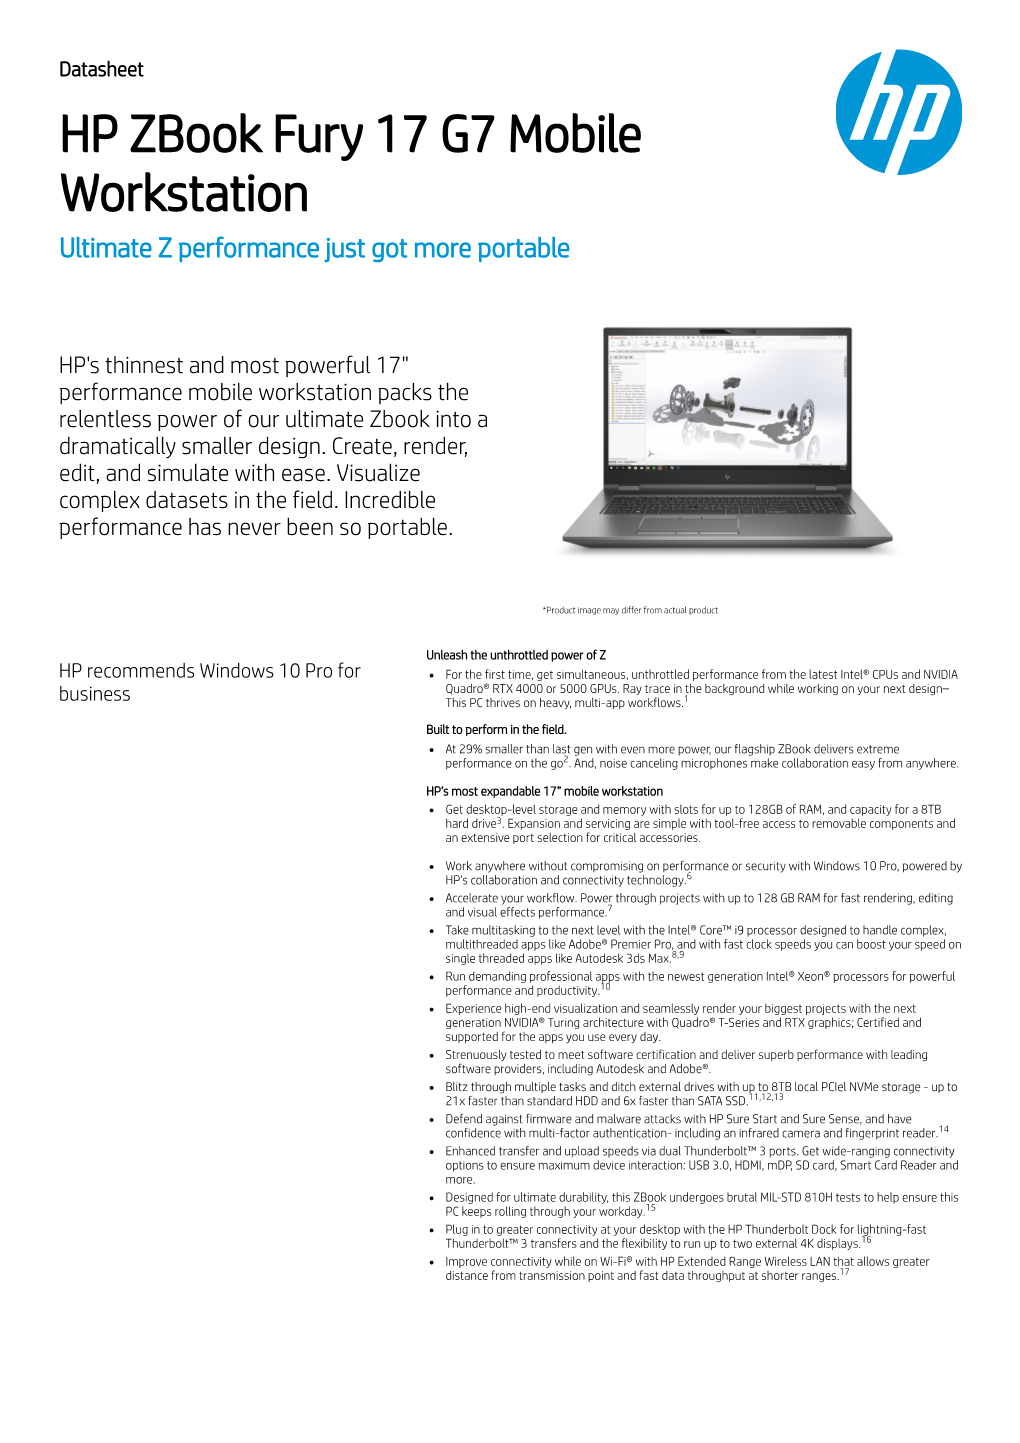 HP Zbook Fury 17 G7 Mobile Workstation Ultimate Z Performance Just Got More Portable